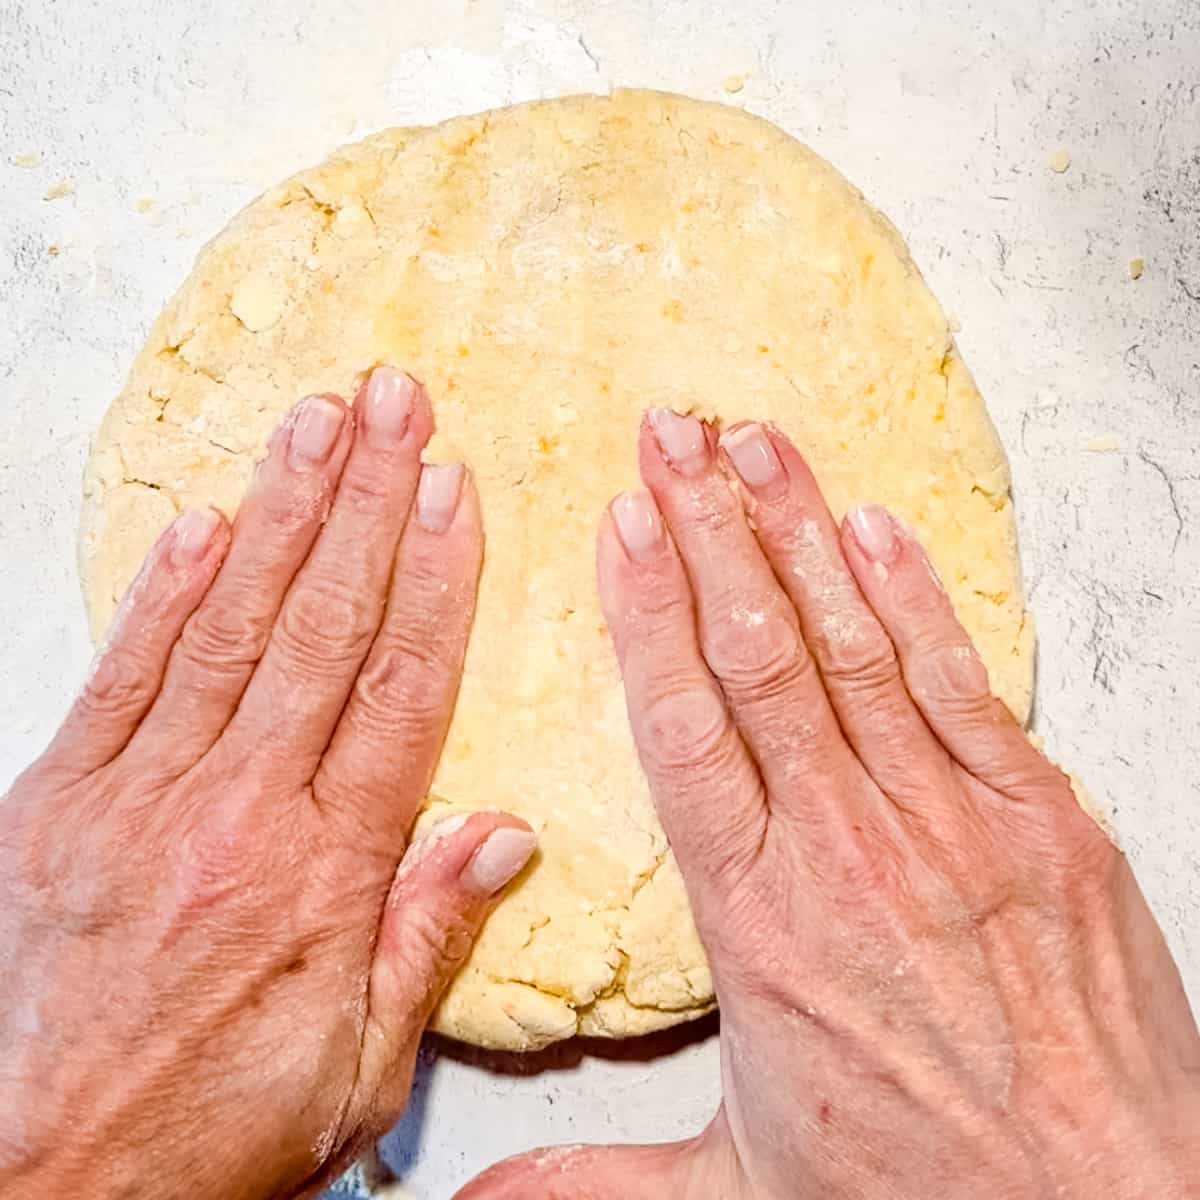 Patting scone dough into a circle with hands.